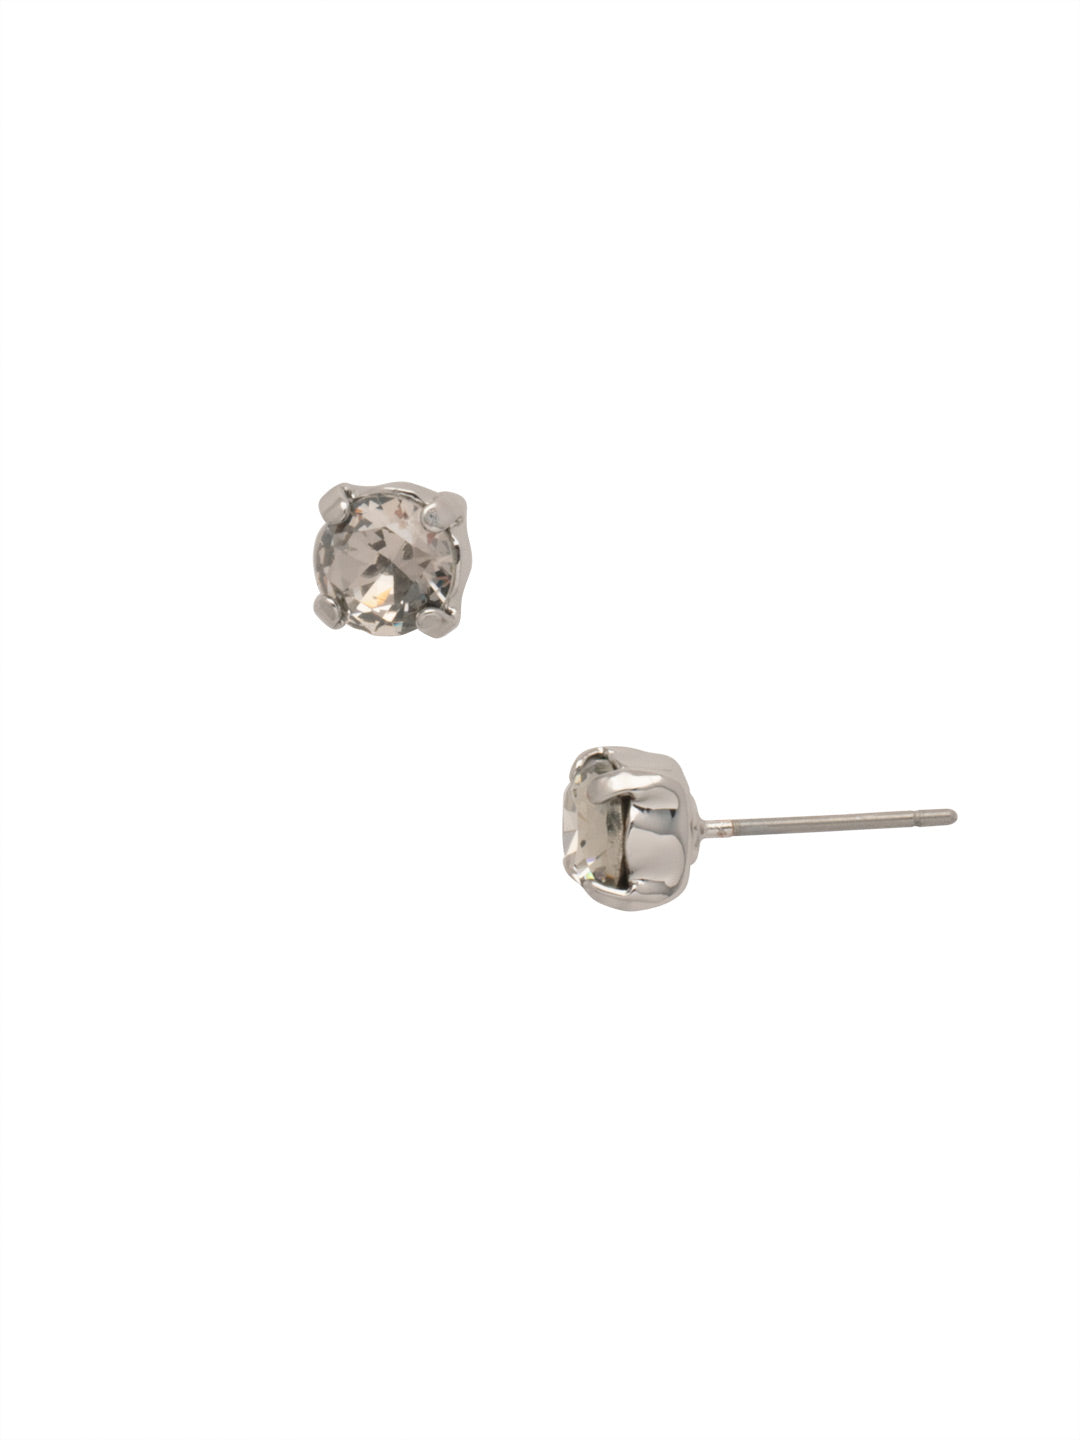 Jayda Stud Earrings - EDN32PDBD - <p>The Jayda Stud Earrings are the perfect every day wardrobe staple. A round crystal nestles perfectly in a metal plated post with four prongs. </p><p>Need help picking a stud? <a href="https://www.sorrelli.com/blogs/sisterhood/round-stud-earrings-101-a-rundown-of-sizes-styles-and-sparkle">Check out our size guide!</a> From Sorrelli's Black Diamond collection in our Palladium finish.</p>